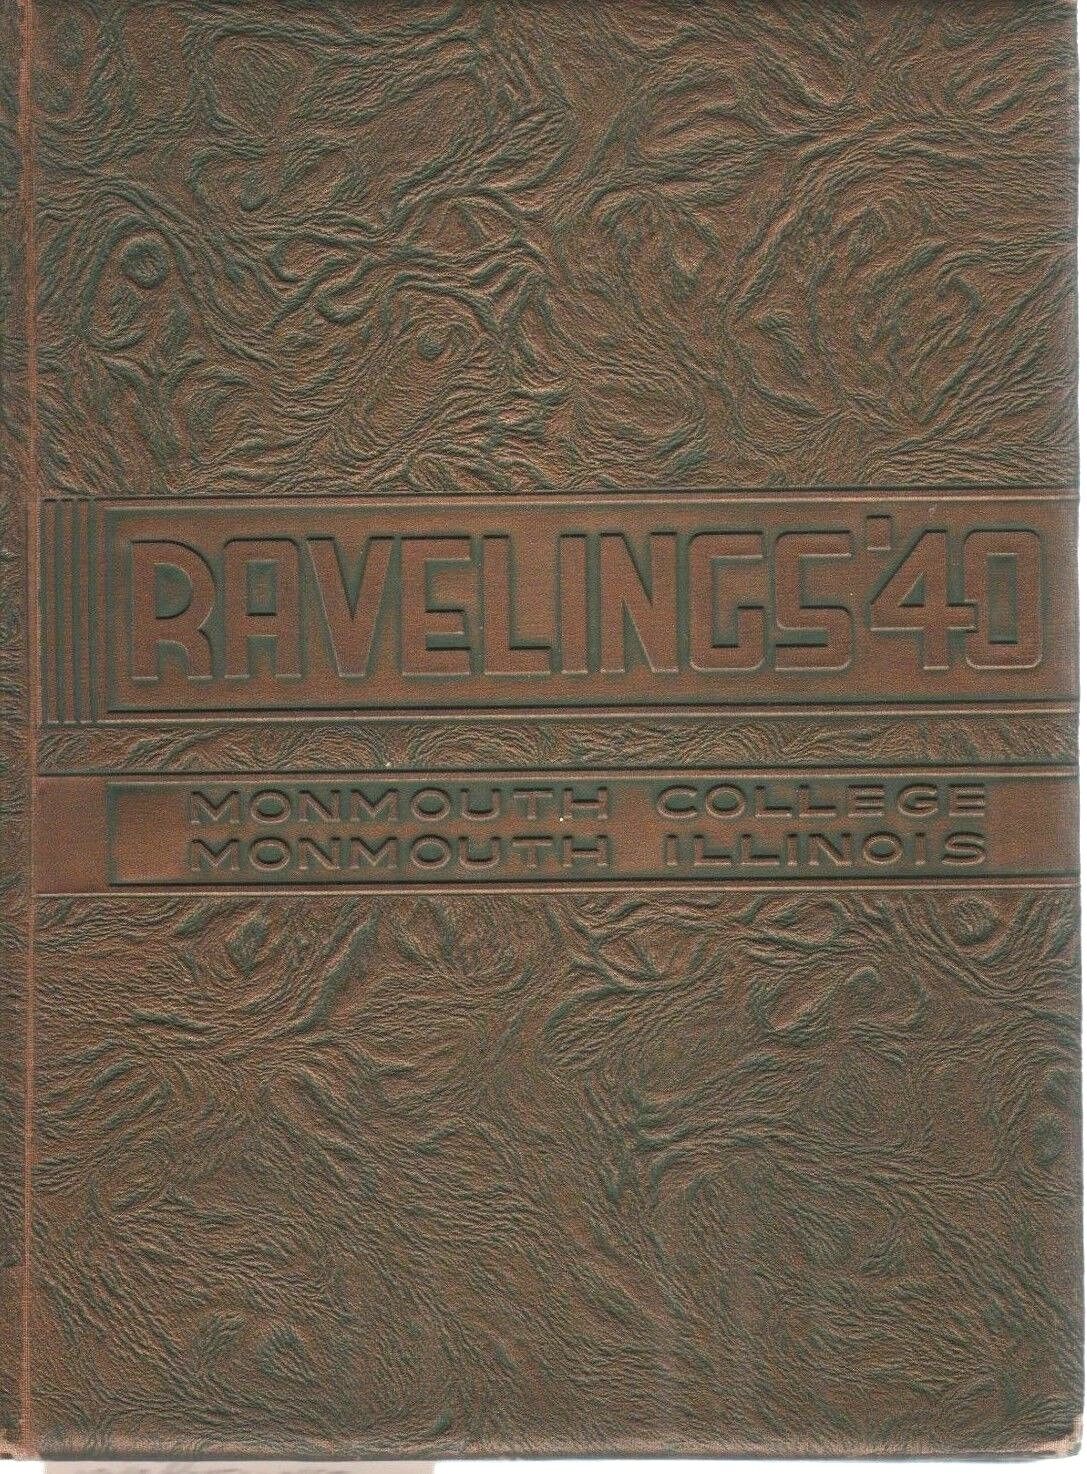 Original 1940 Monmouth College Illinois Yearbook-Ravelings+ The Oracle 1940 